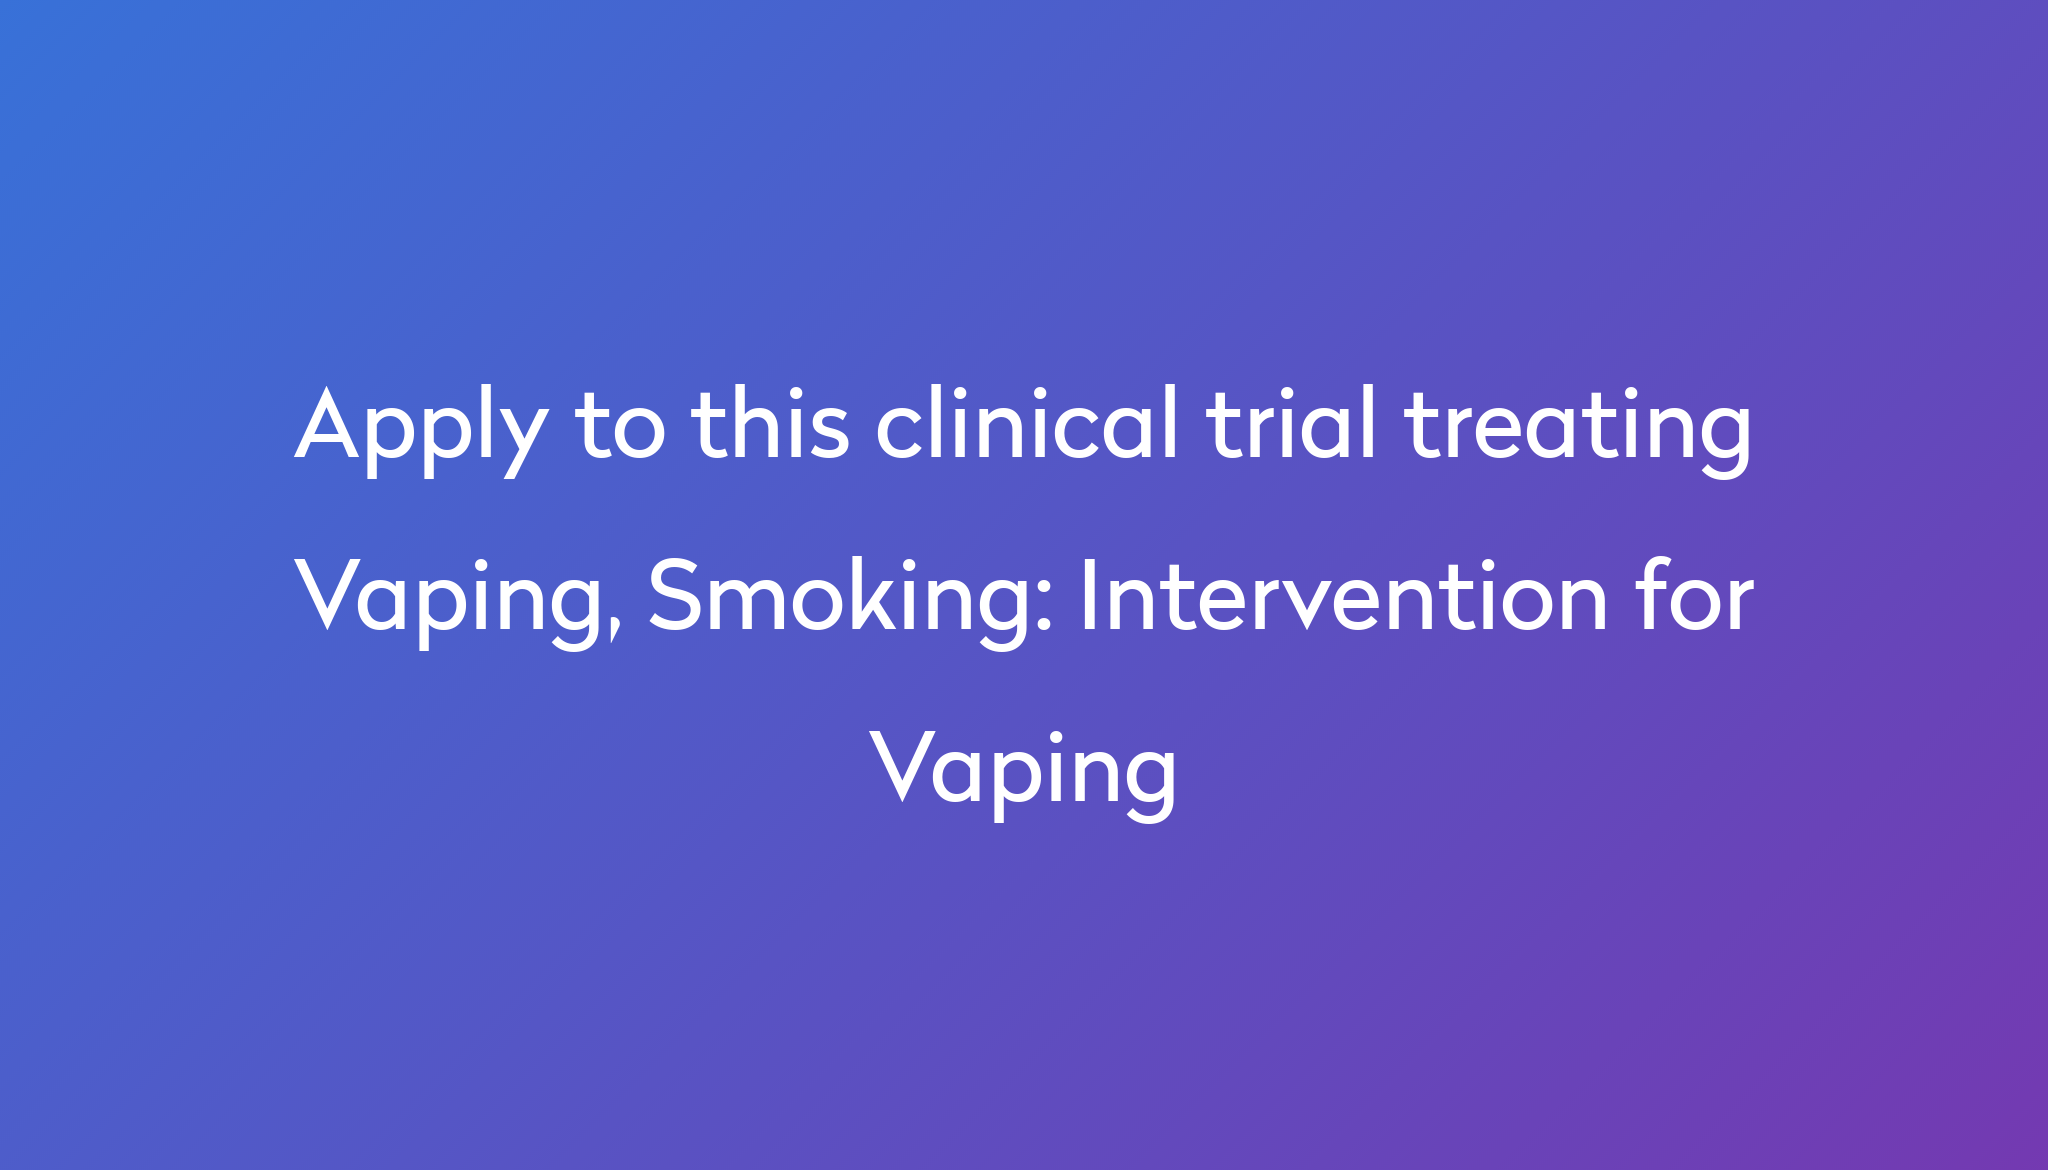 intervention-for-vaping-clinical-trial-2023-power